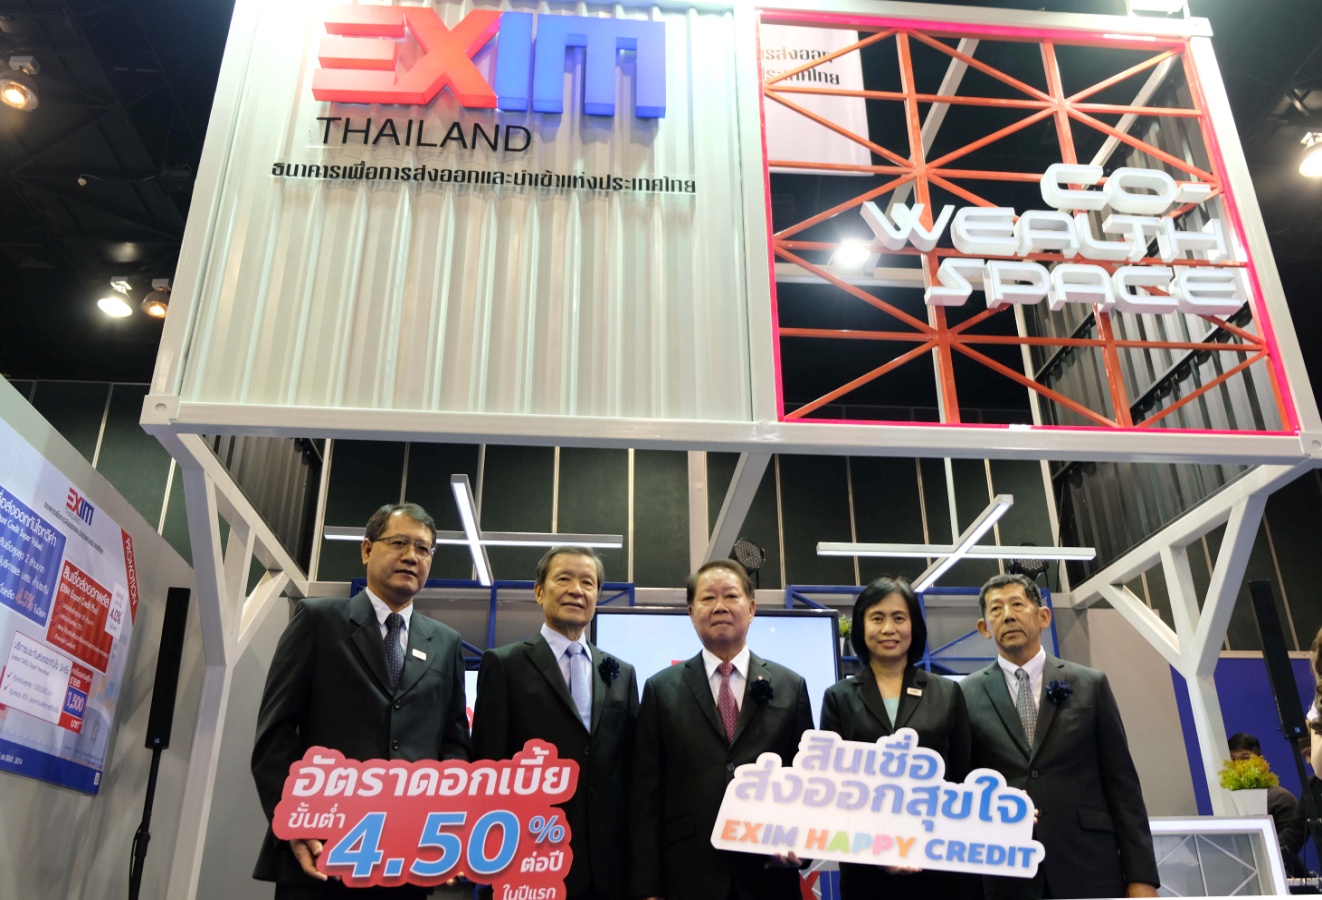 EXIM Thailand Opens Booth at Money Expo Pattaya 2018